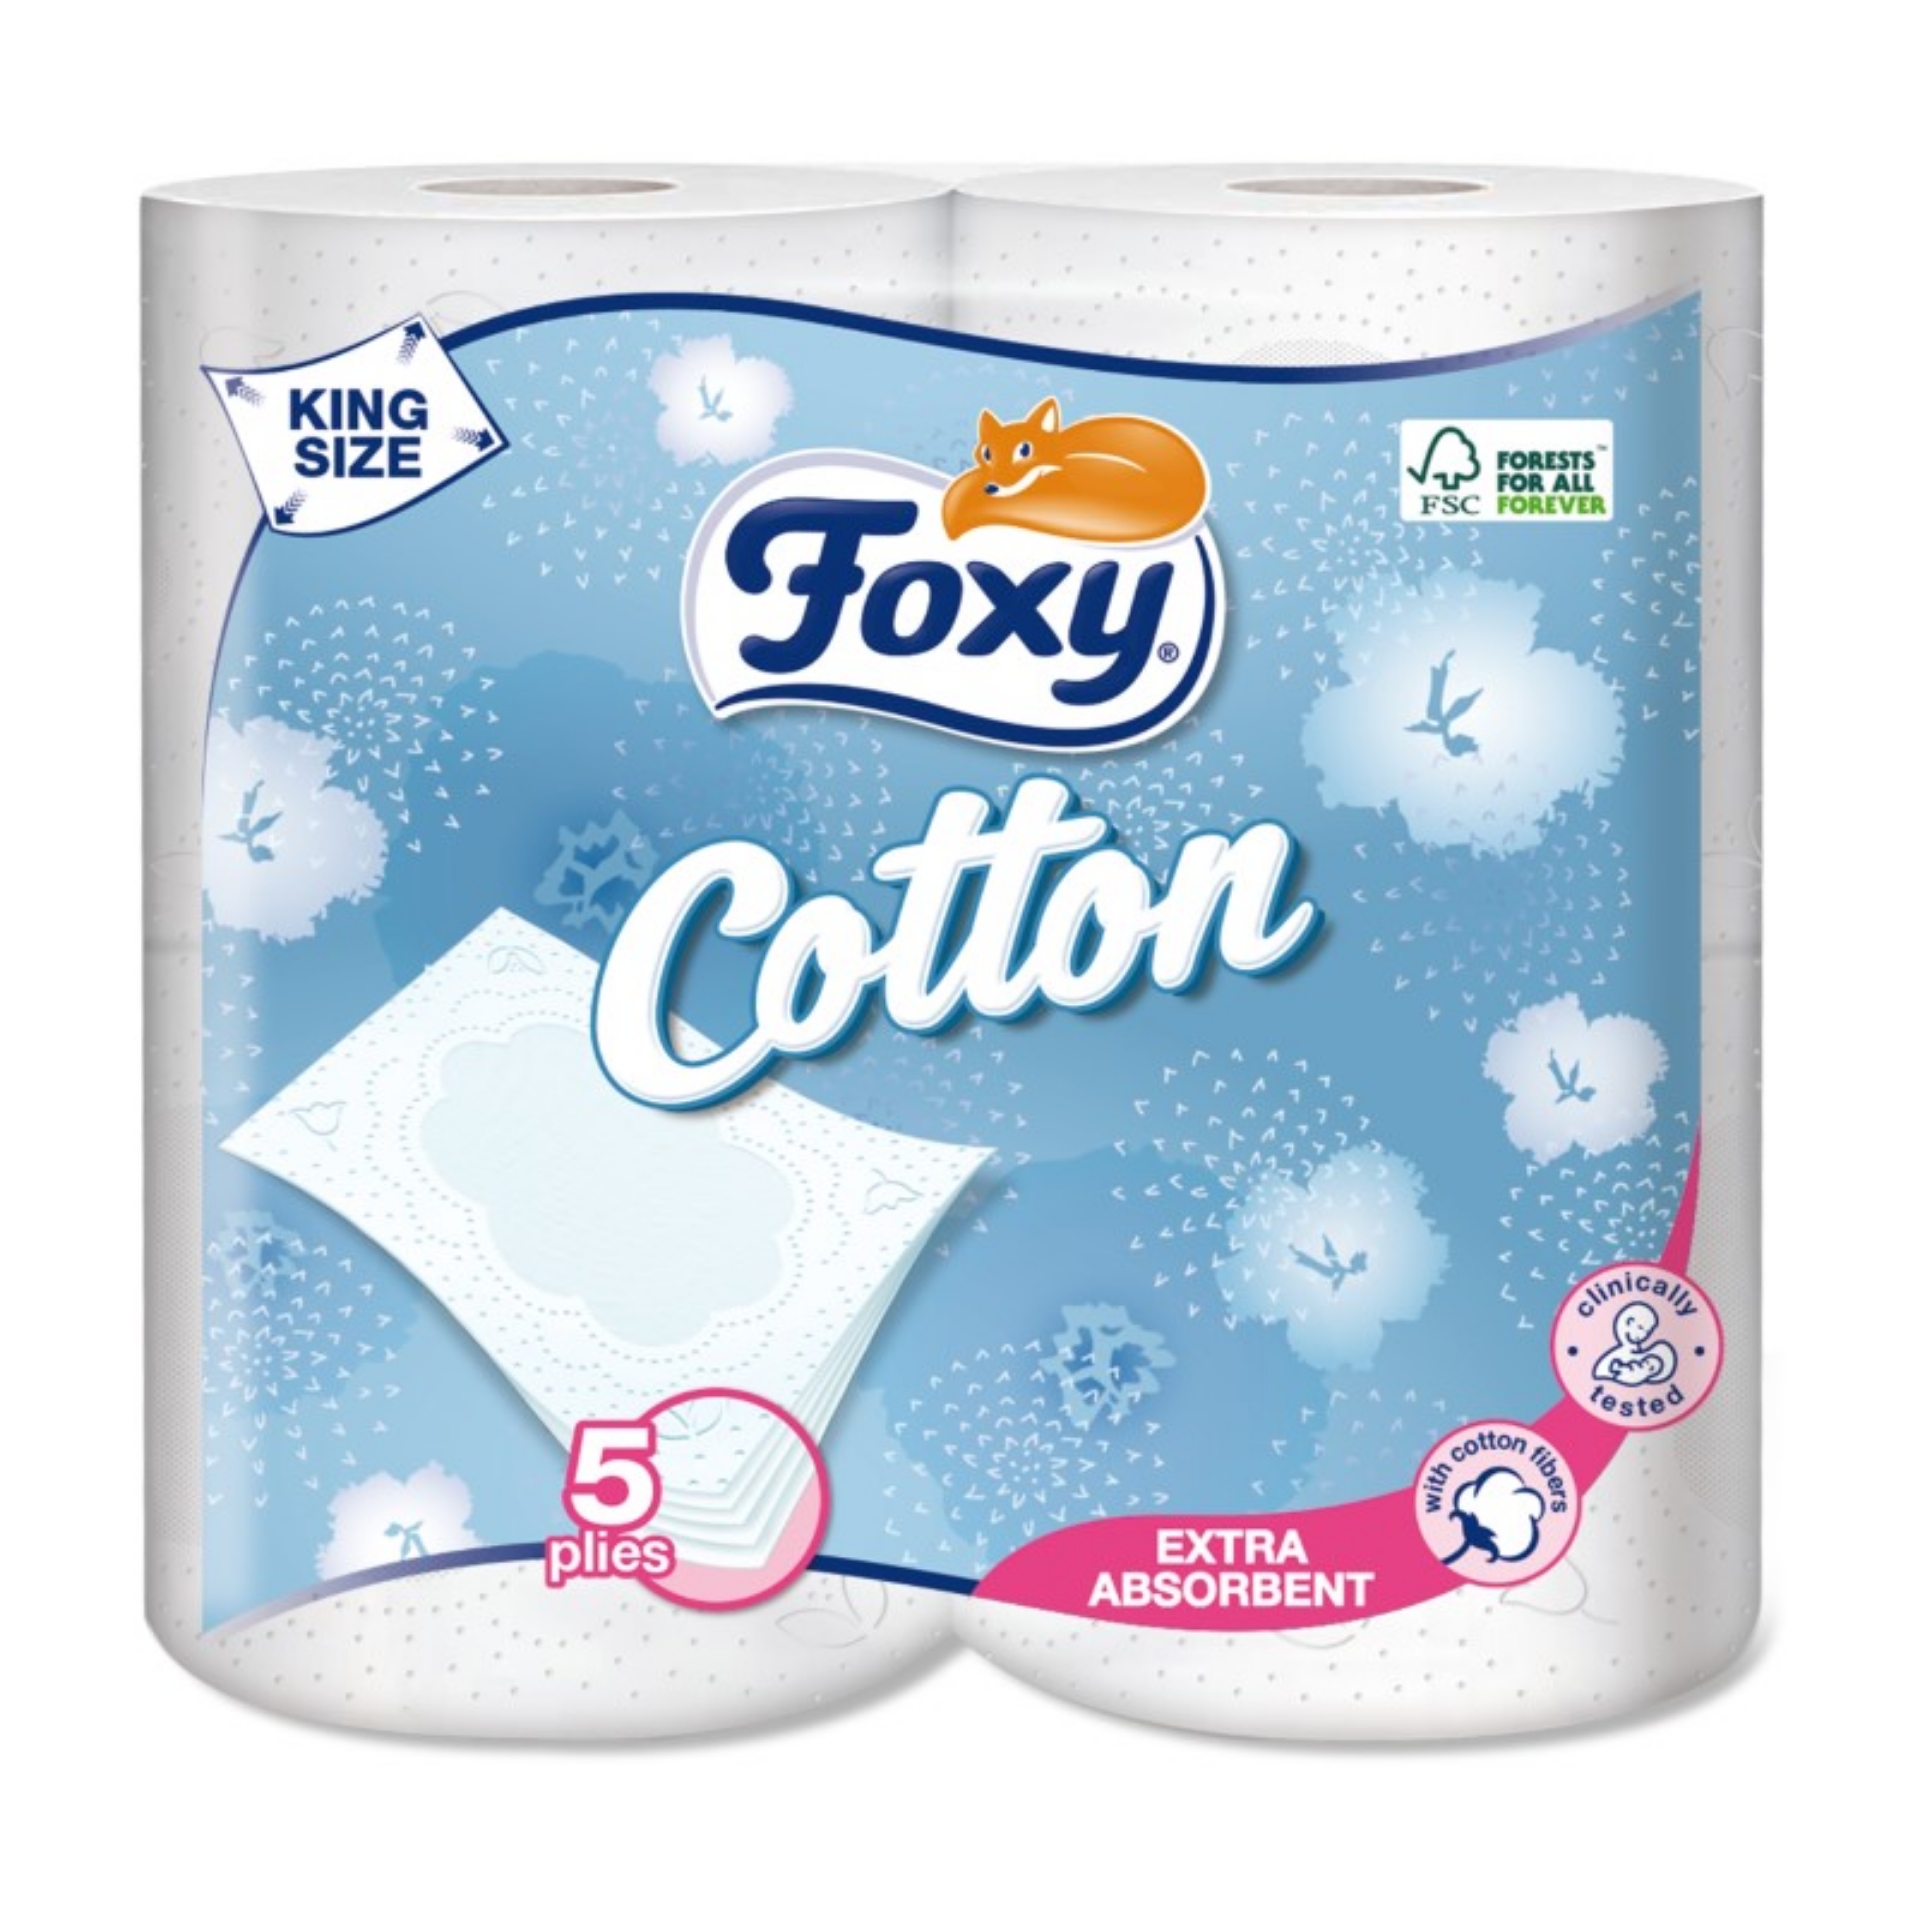 Picture of FOXY COTTON - TOILET ROLL 5ply (eu/plt)